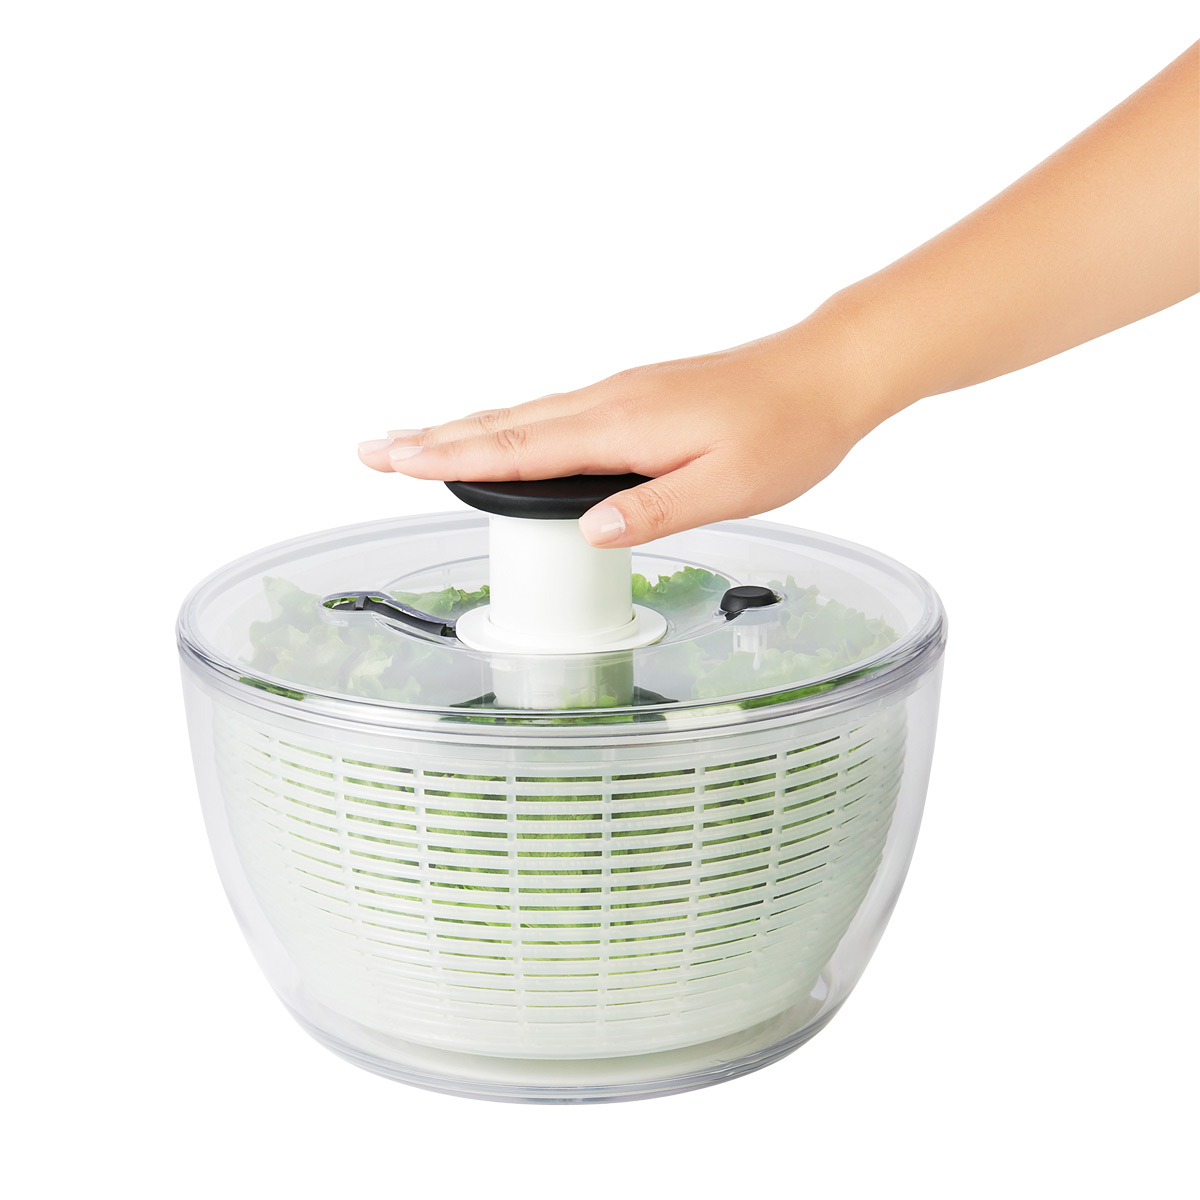 https://www.containerstore.com/catalogimages/335242/10073155-OXO-Salad-Spinner-Clear-Ven.jpg